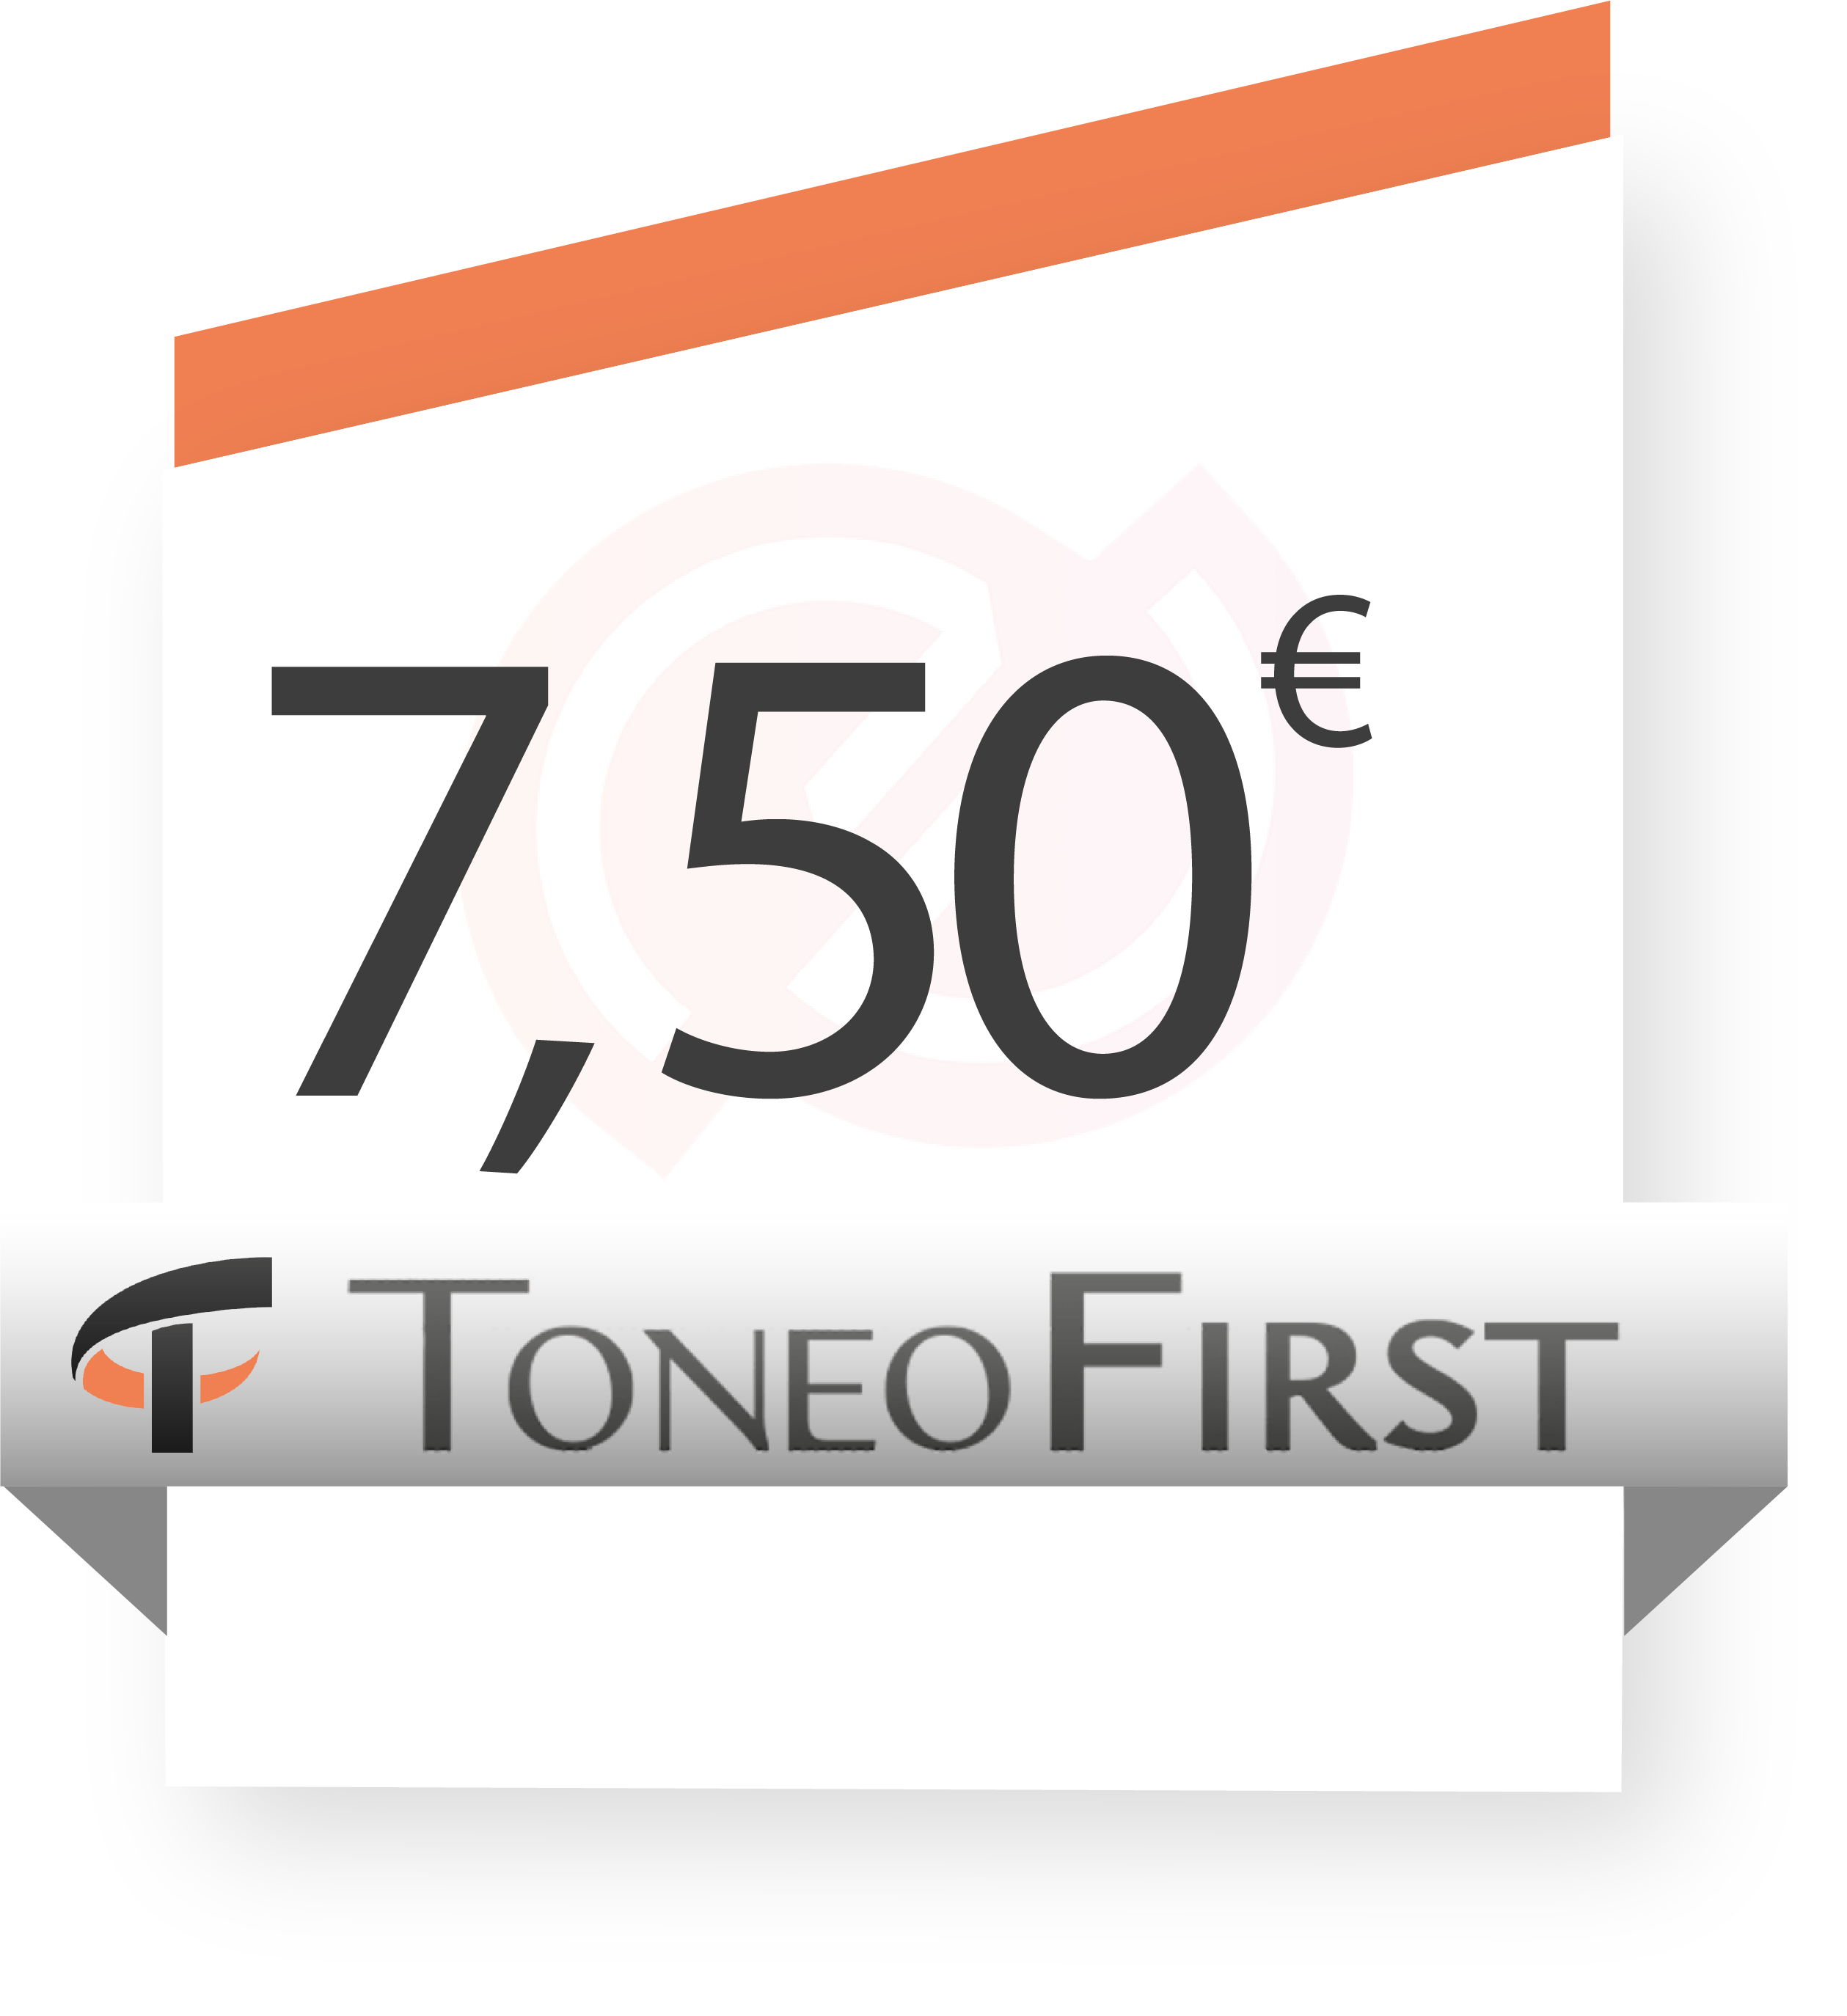 Toneo First 7.50€